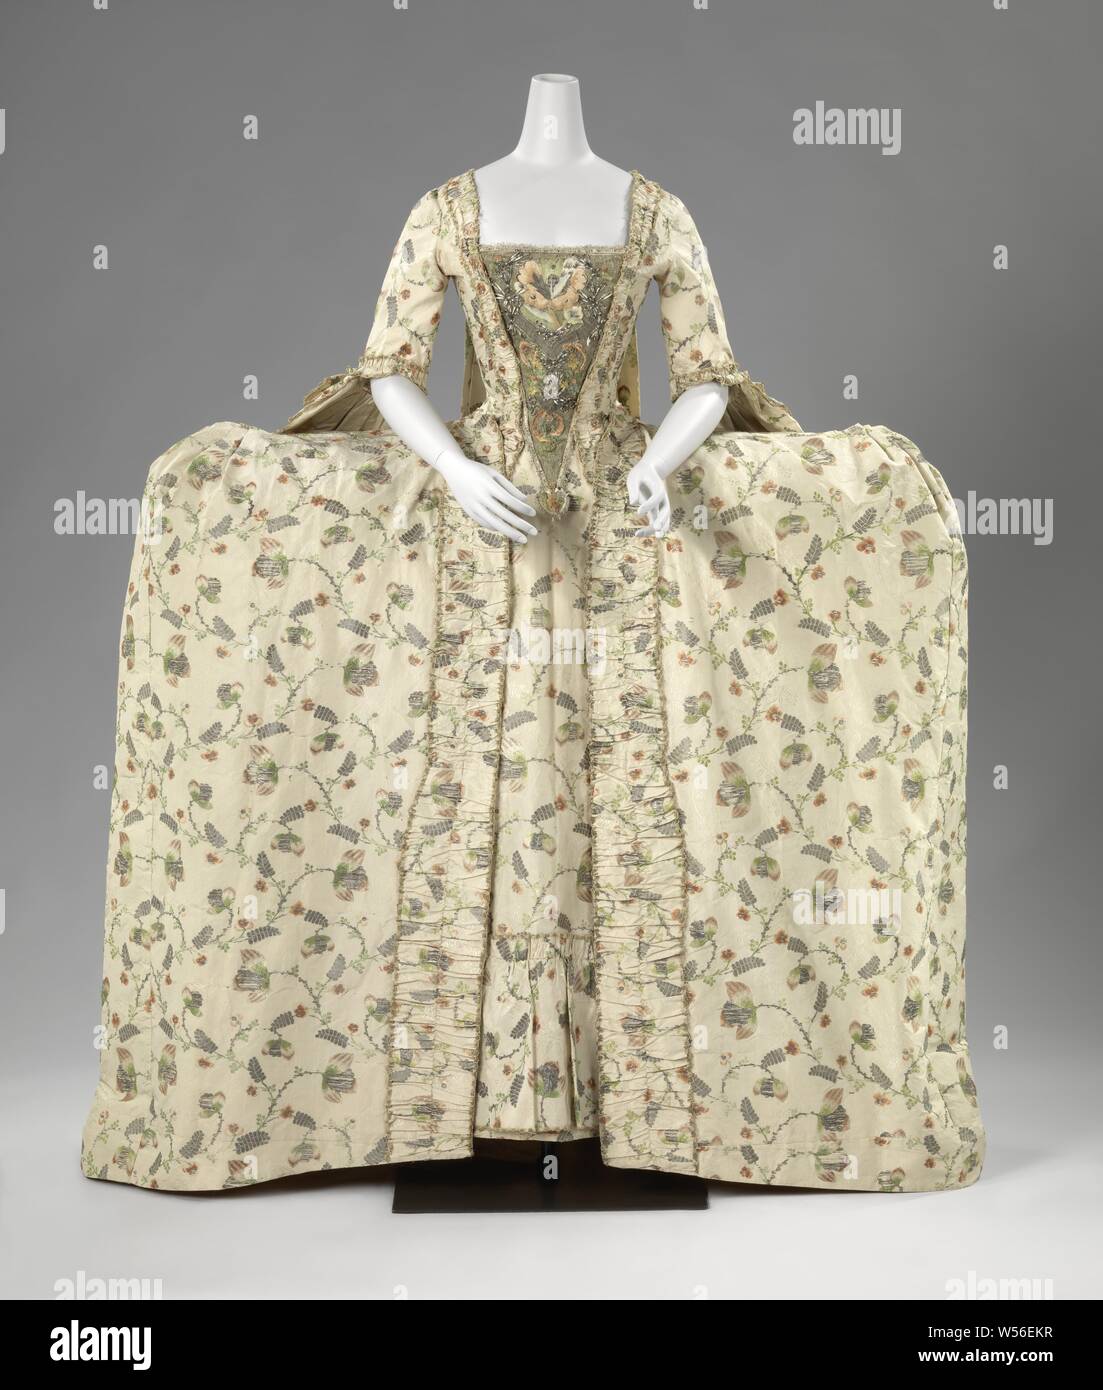 Sack-Back Gown with a Half Skirt (robe à la française) Overcoat with half skirt or robe à la française, Dress of silk brocade, with a cream colored fond, on which multicolored sides, golden and silver flowers, consisting of an overcoat (a) and a half skirt or tablier (b). Lined with yellow silk. Model: 'Grande Parure', Amsterdam, anonymous, Netherlands (possibly), c. 1765 - c. 1775, japon, voering, l 152 cm l 103 cm Stock Photo